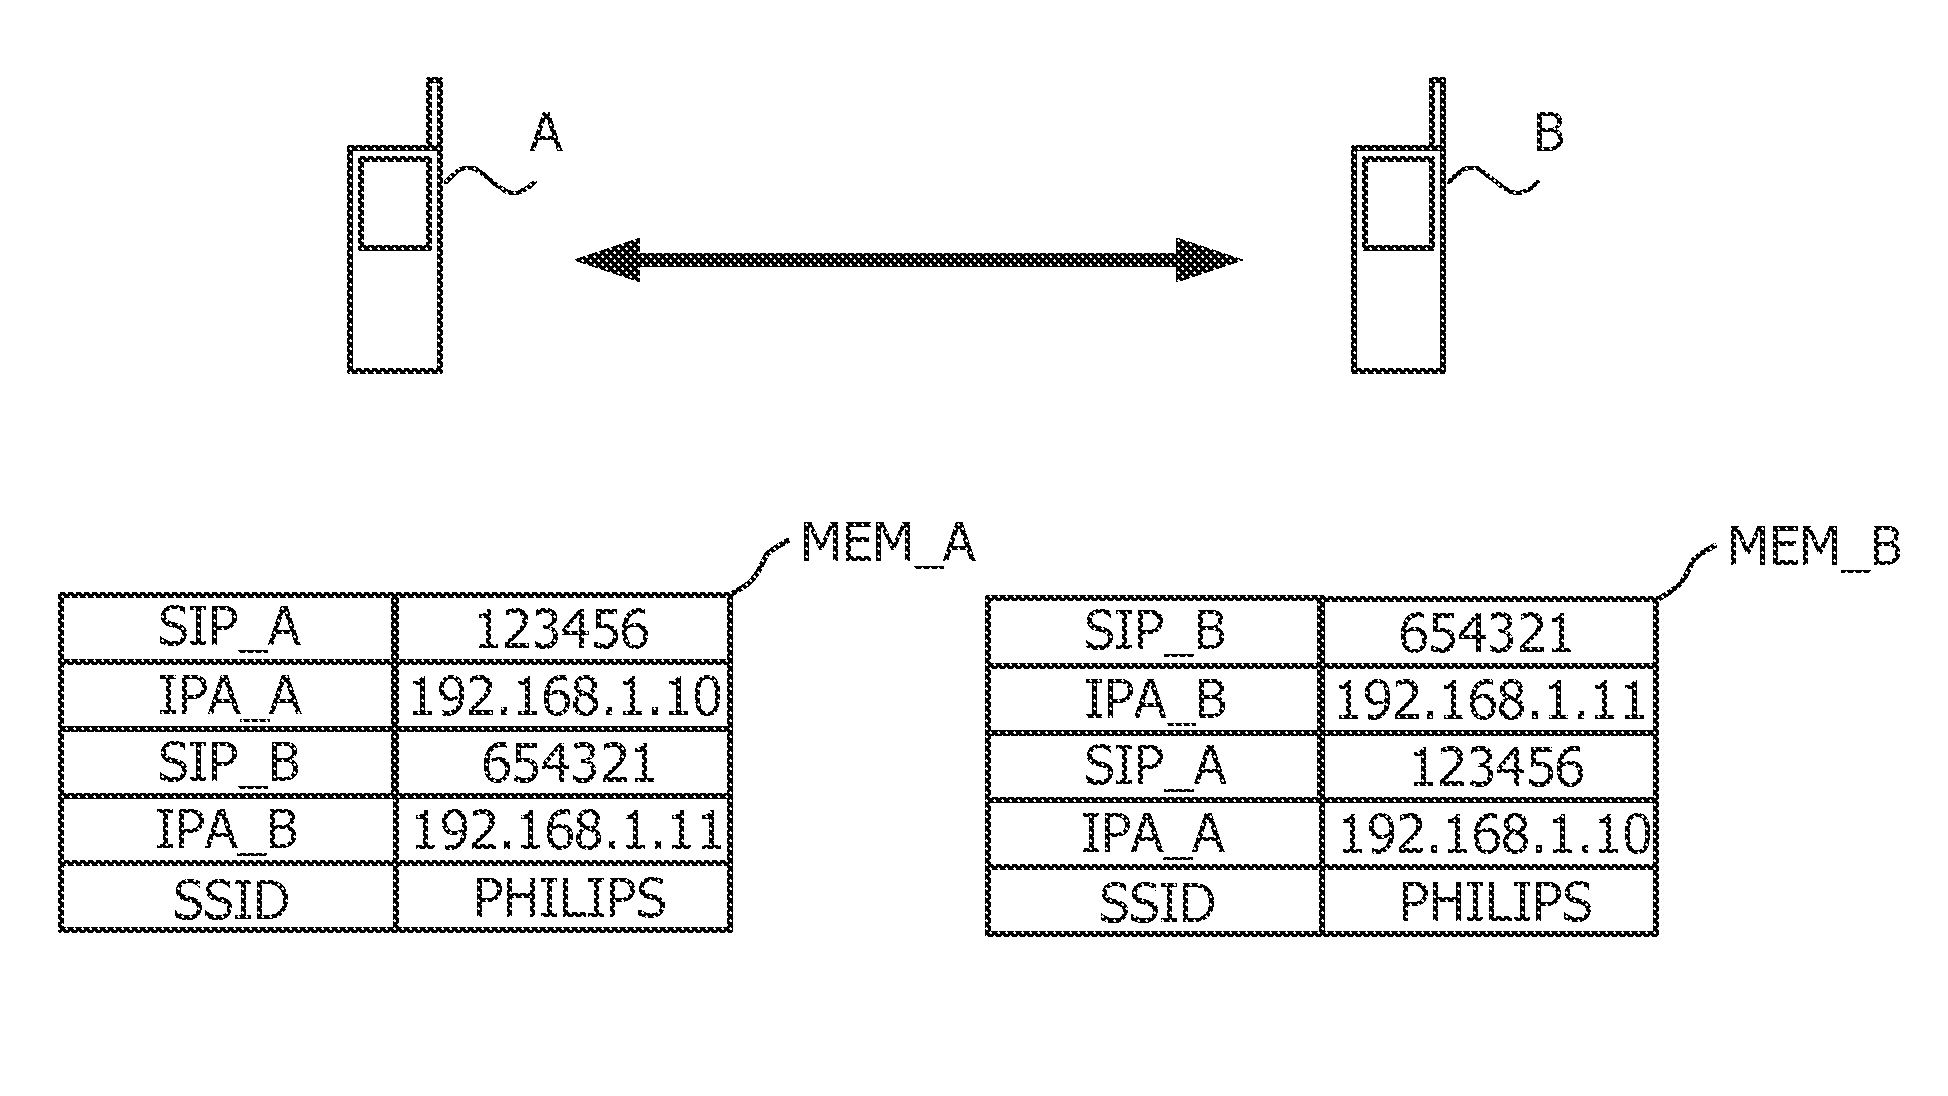 Method of establishing a direct communication between a first wireless phone and a second wireless phone